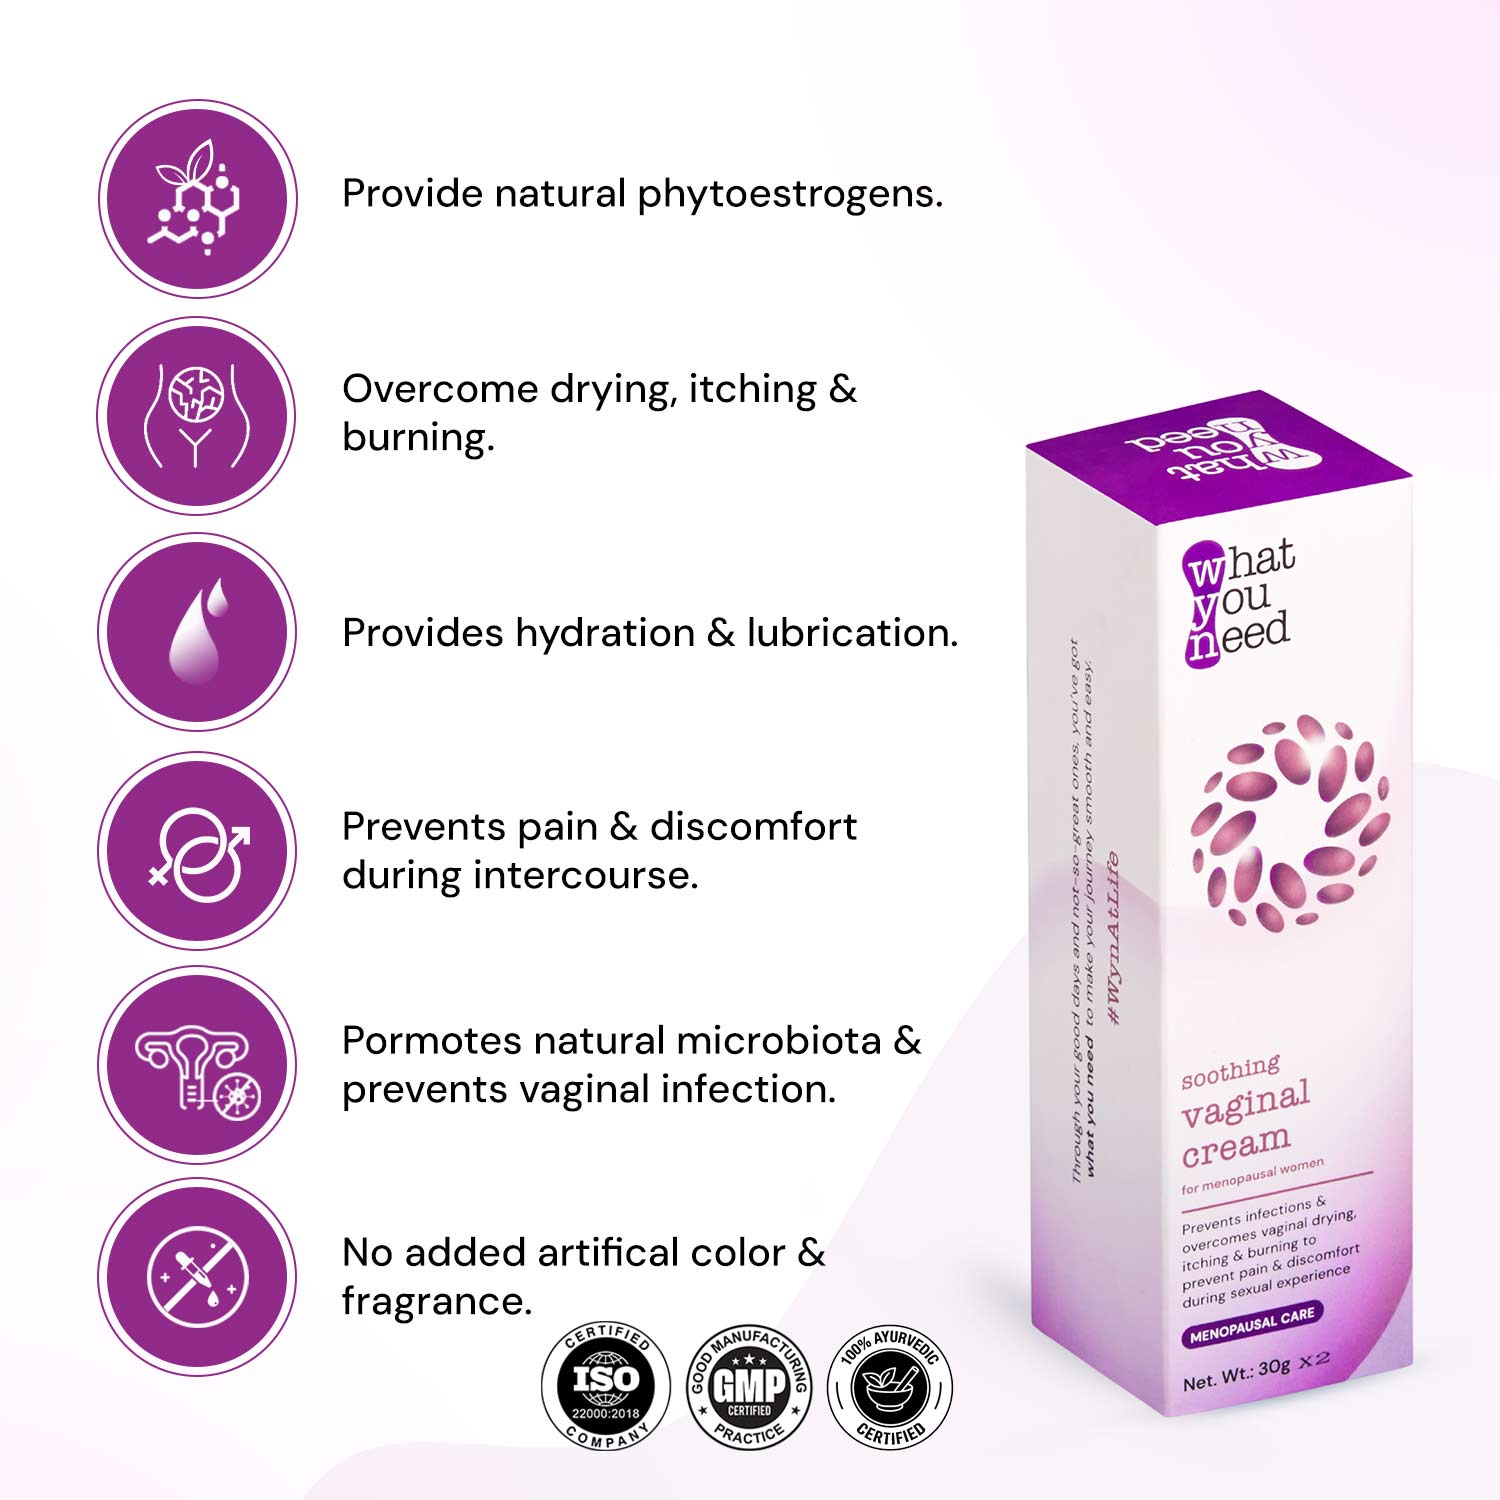 Soothing Vaginal Cream Benefits